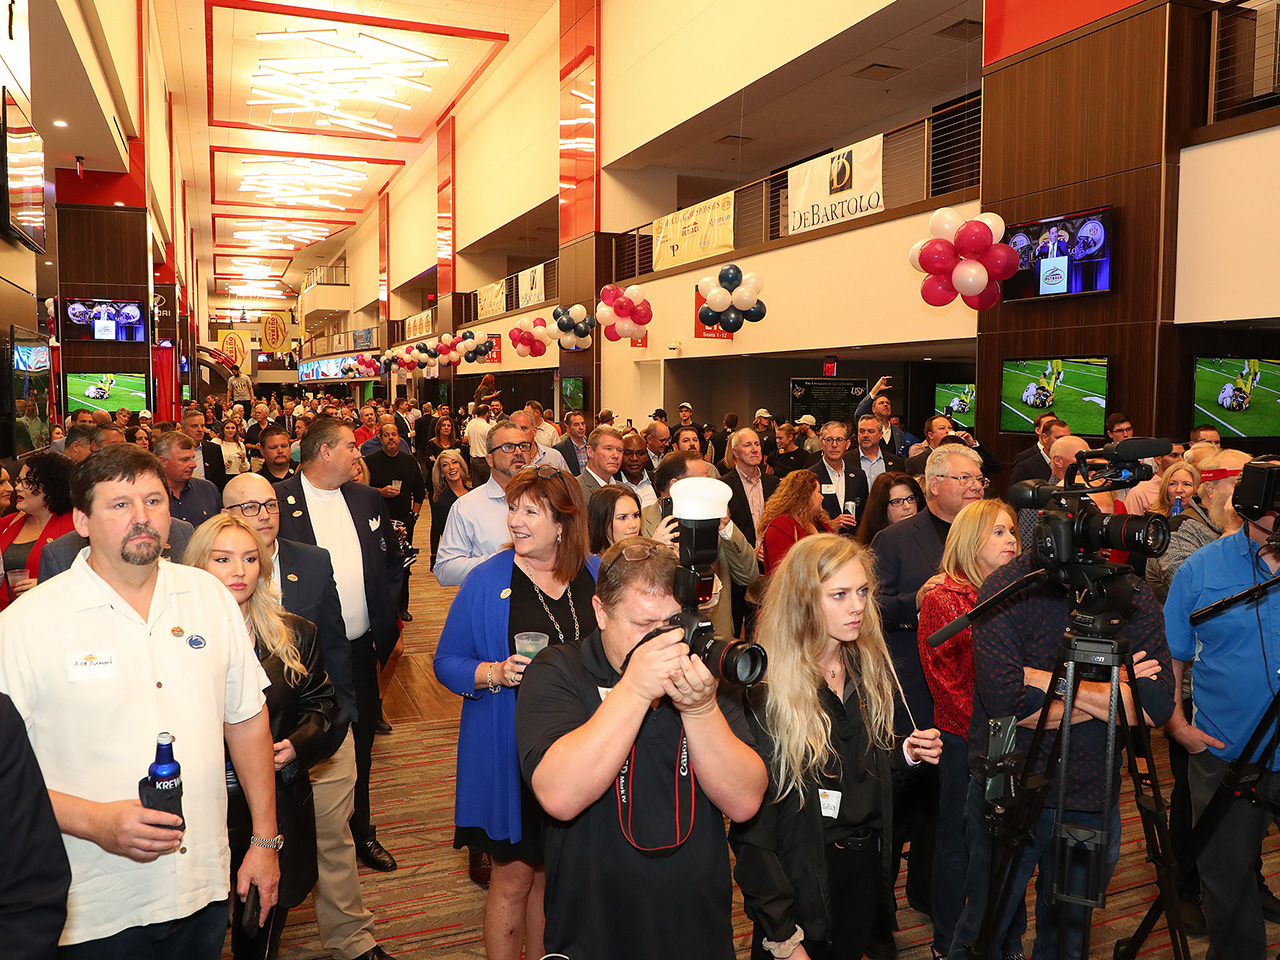 More than 600 Bowl VIPs & Supporters were on hand to welcome the coaches